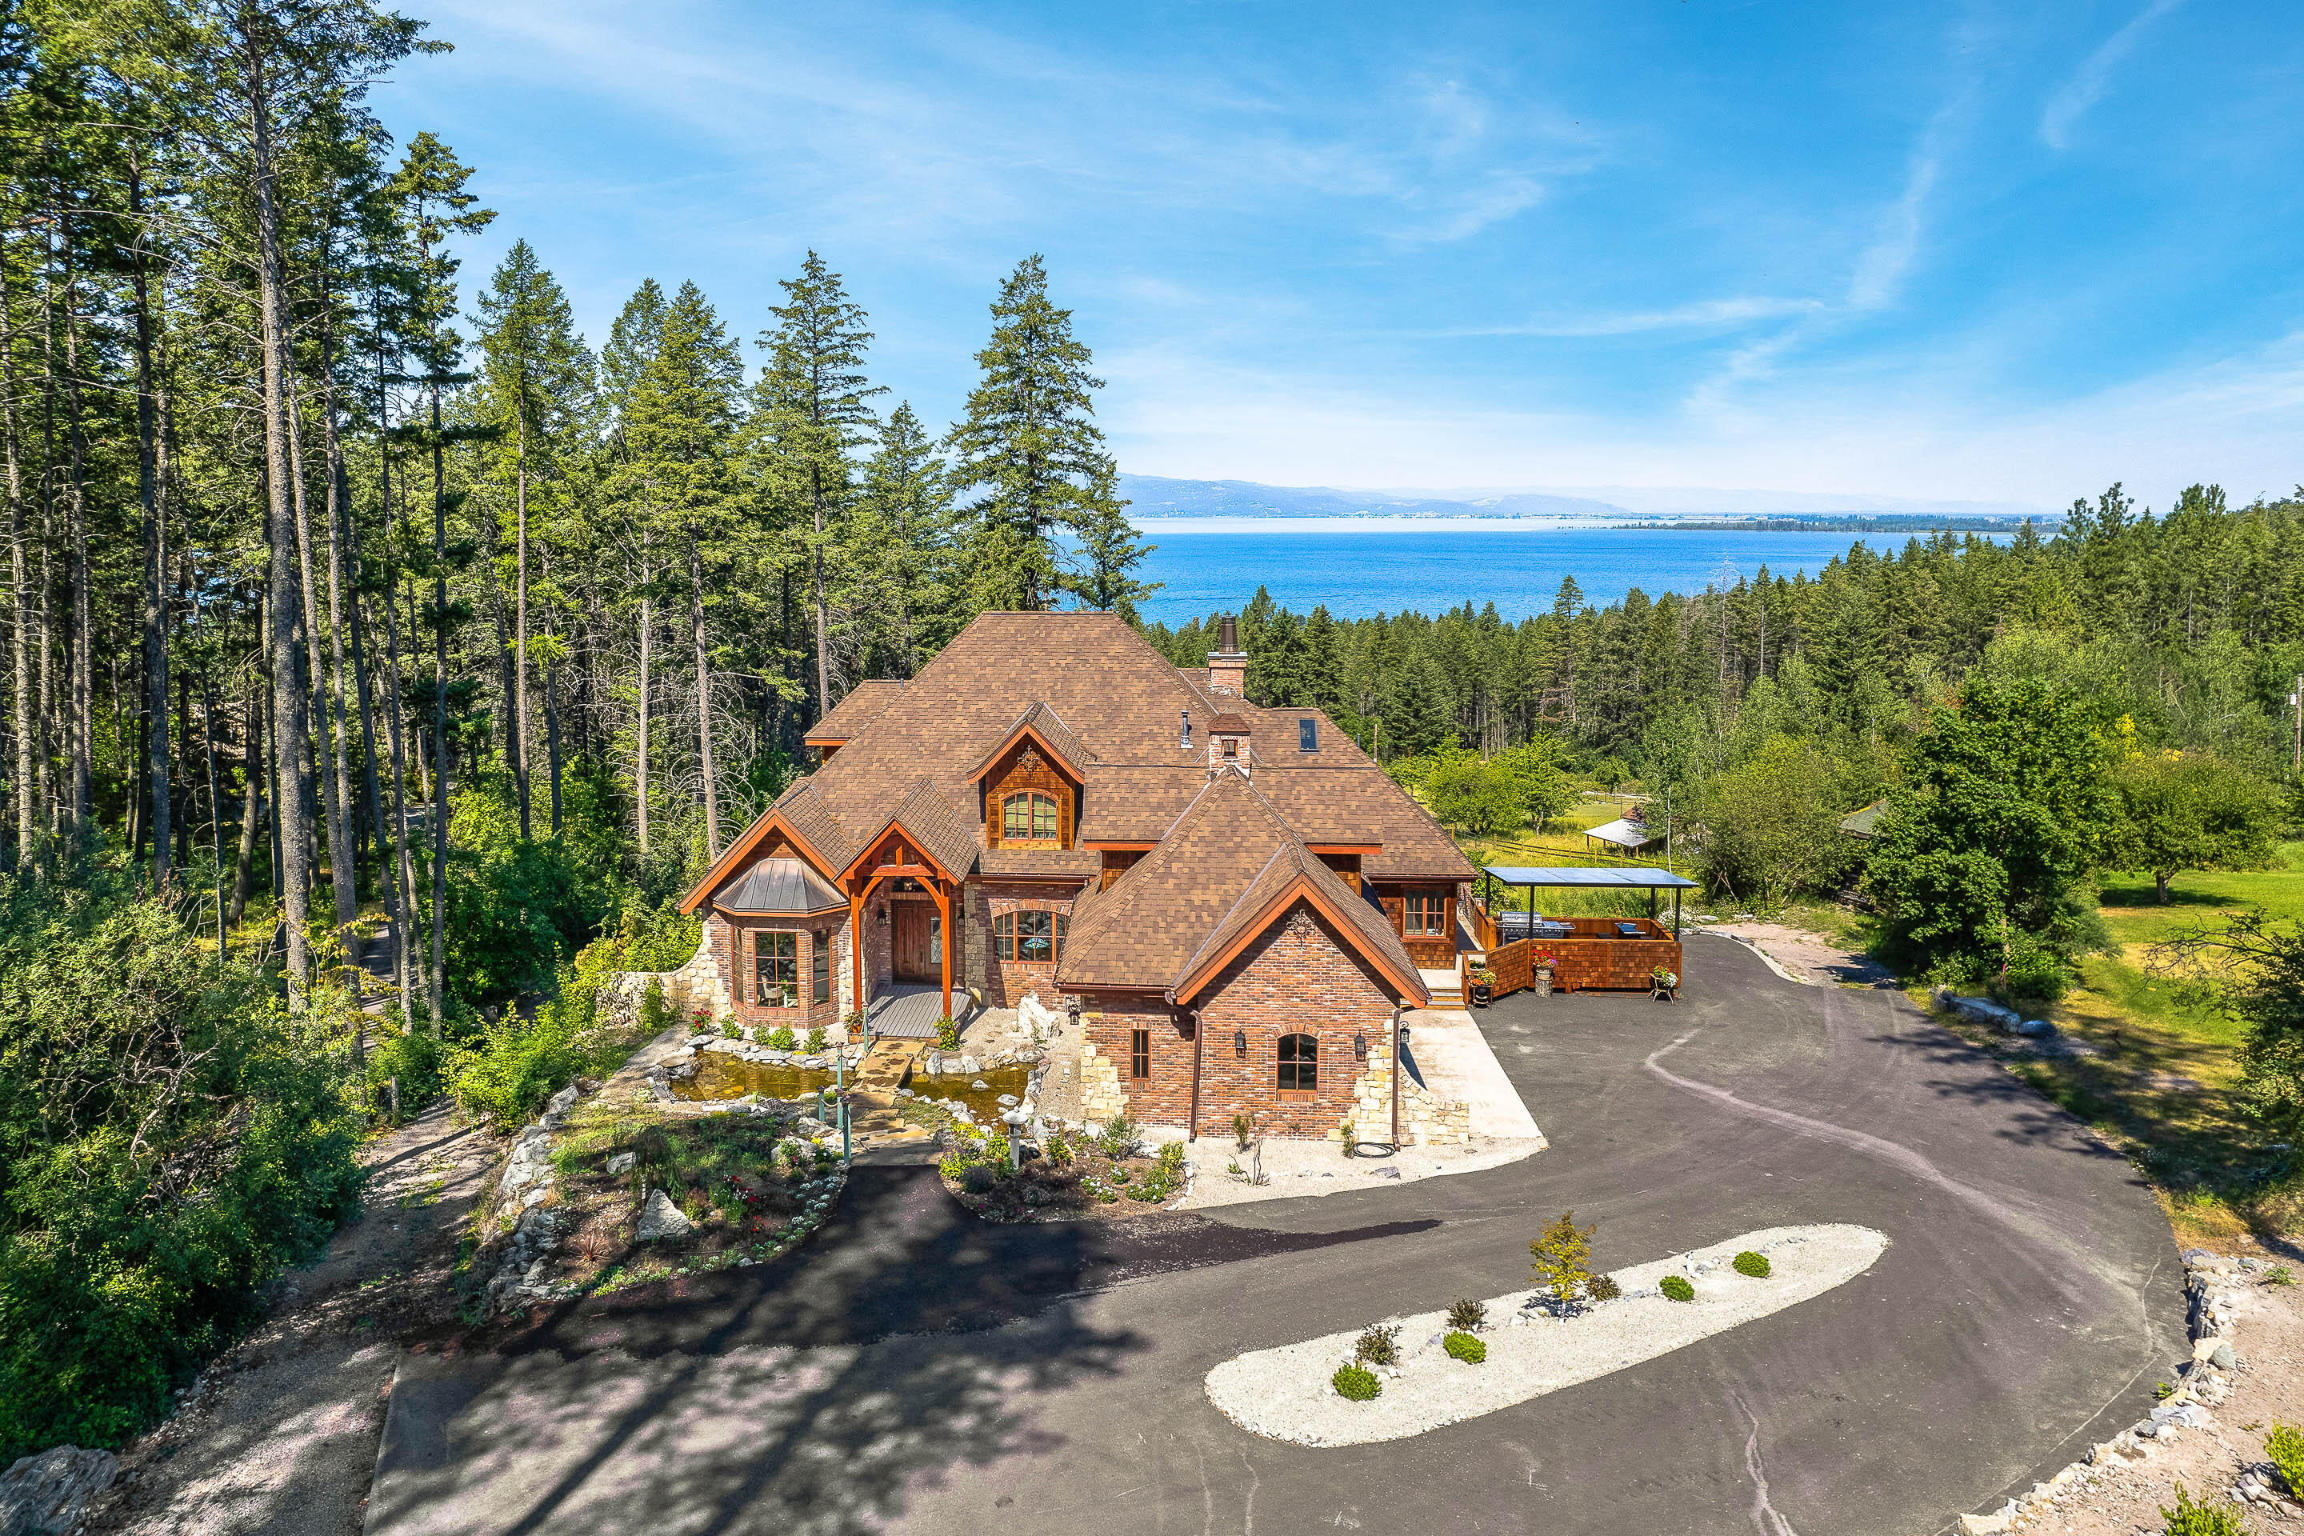 A visionary’s masterpiece! Welcome to this elegant Manor House, bringing w/ it a touch of old-world opulence, multi-cultural glamour, & breathtaking Flathead Lake & sunset views. This spectacular 5BD/7BA 6,647 SF residence settled on 1 acre boasts no HOA/CCRs and is just minutes from the artisan village of Bigfork. Bring relaxation & serenity into your day surrounded by the meticulously handcrafted elements of this elaborate home. Entertain gatherings of every size from your huge chef's kitchen, dining area, large covered deck, or the cozy wine grotto. The home features a complete in-law suite with 2 bedrooms and a separate kitchen with separate private access. Settle into your own slice of Northwest MT, where Glacier National Park and more adventure awaits. See Feature Sheet in docs for more information. Furnishings negotiable, personal property list provided upon request. Call Jennifer Shelley at 406.249.8929, Hannah Shelley at 406.270.0794, or your real estate professional.